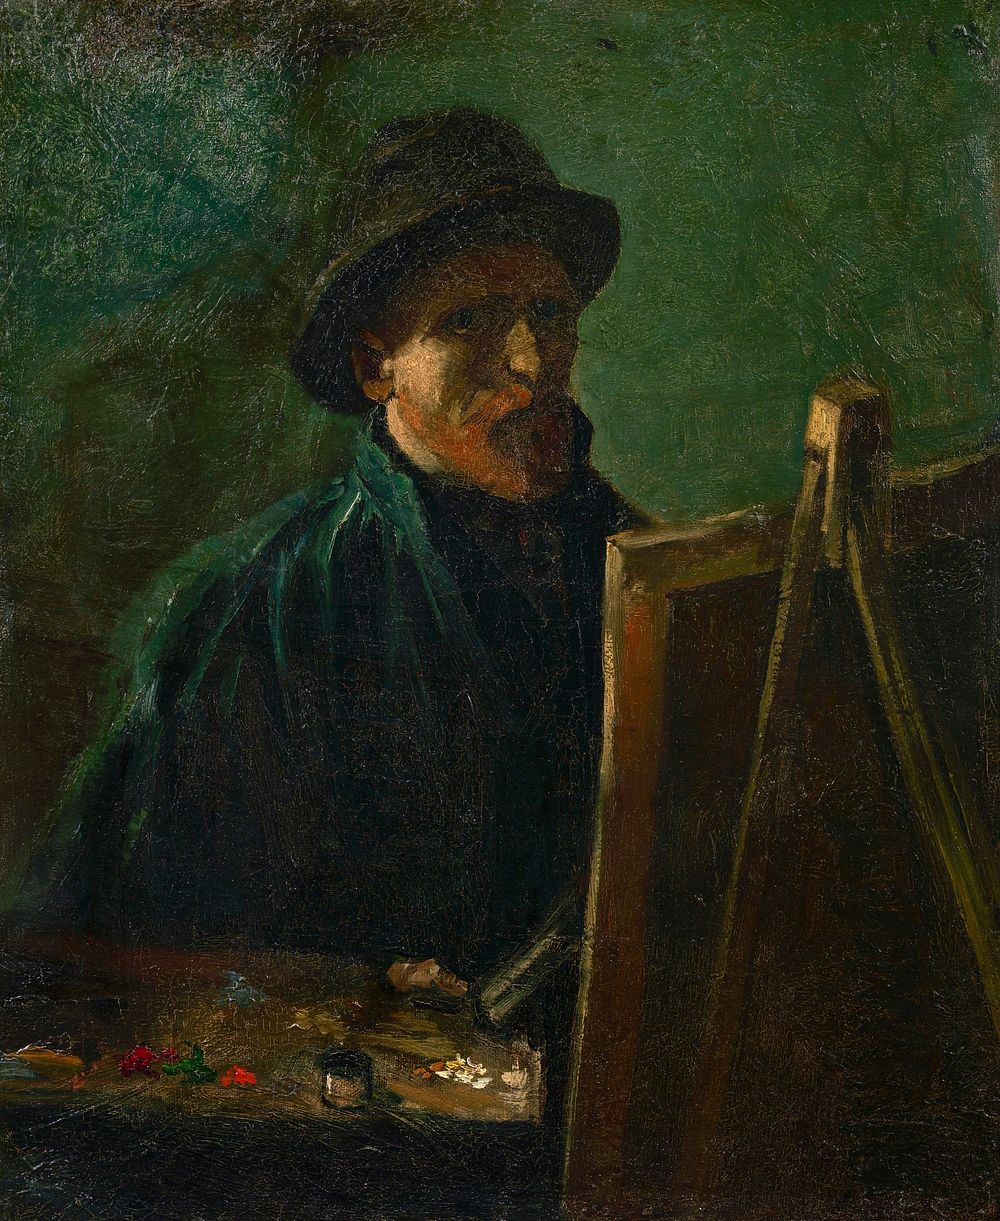 Vincent van Gogh's Self-Portrait with Dark Felt Hat at the Easel (1886) famous painting. Original from Wikimedia Commons.…